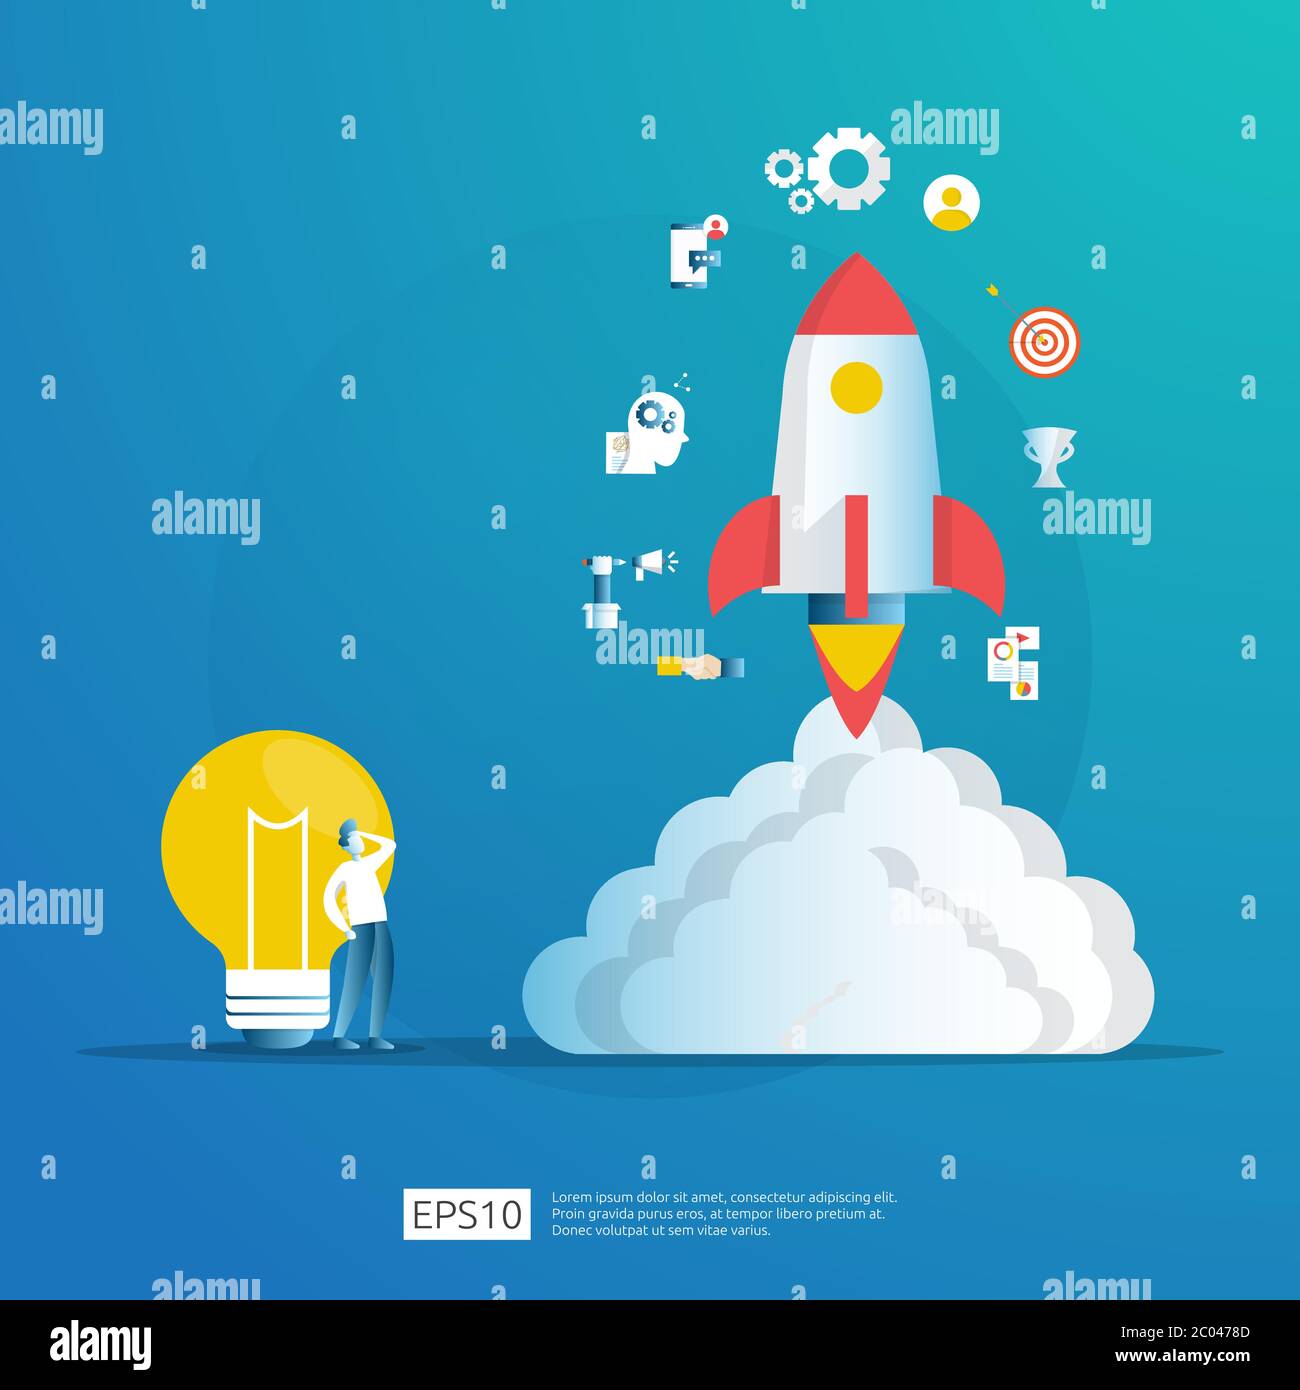 smart investment on technology startup. angel investor business analytic. opportunity idea research concept with lamp light bulb and businessman Stock Vector